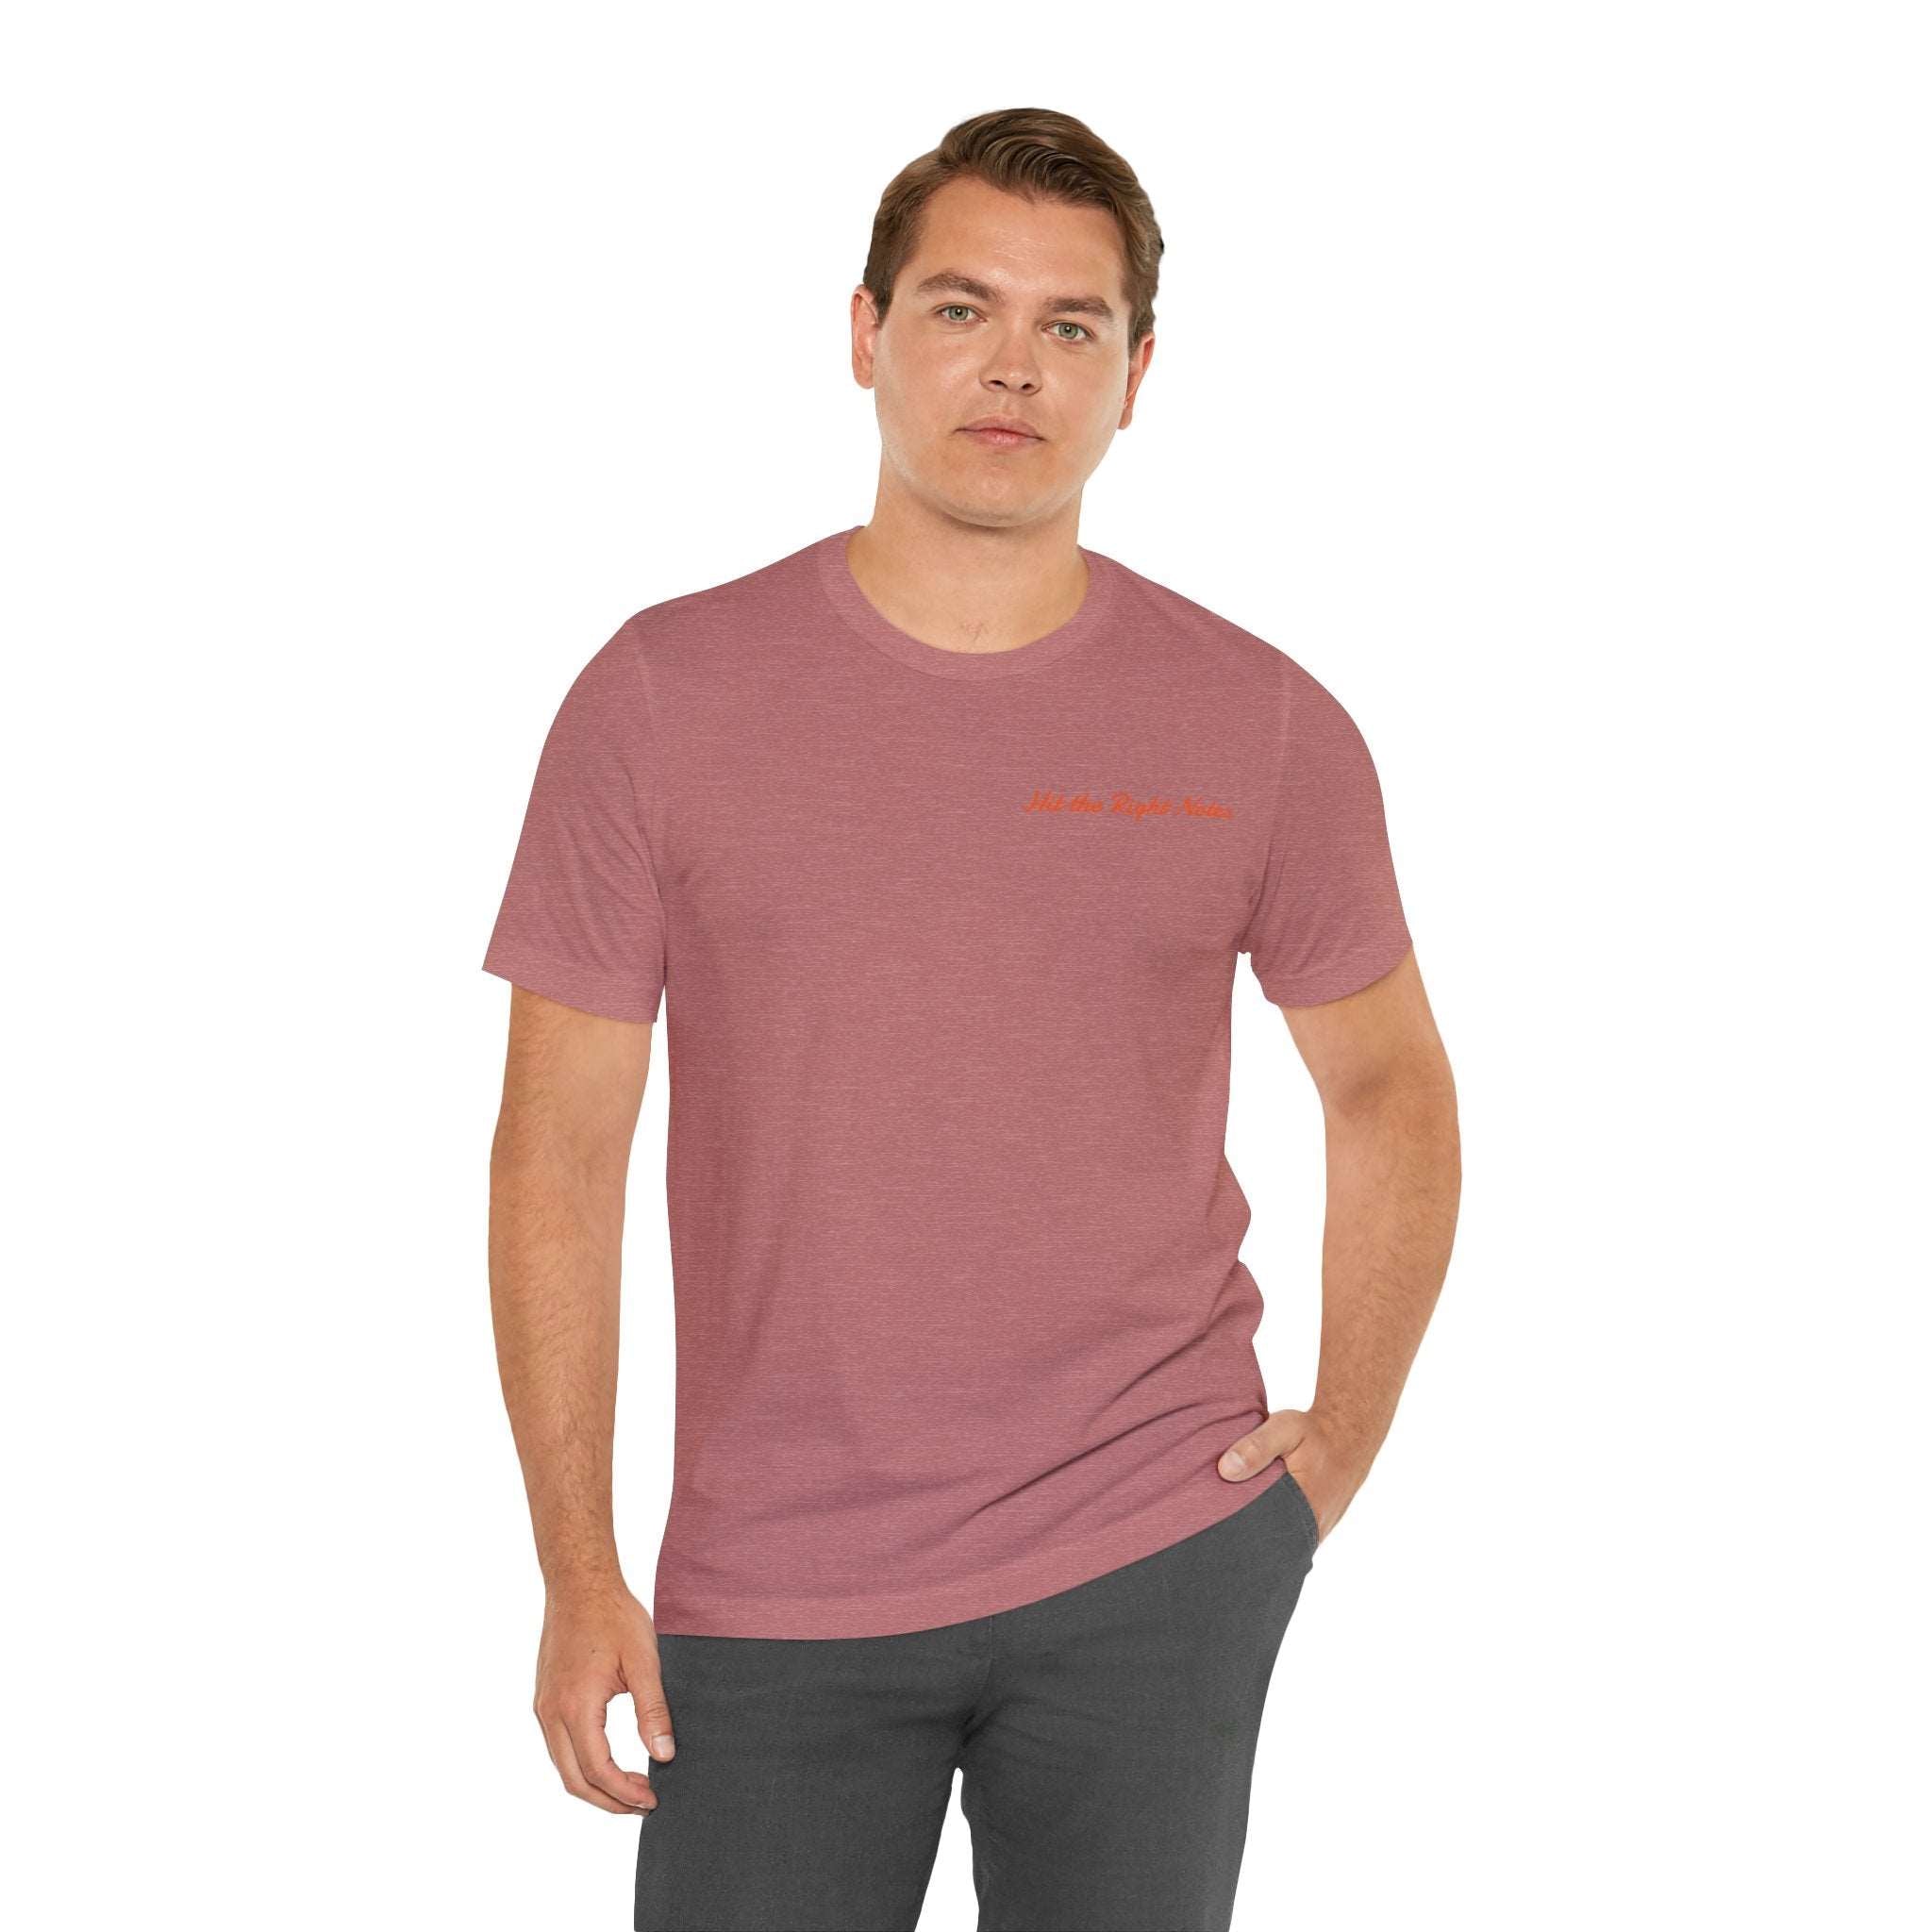 Hit the Right Notes Jersey Tee - Bella+Canvas 3001 Heather Mauve Classic Tee Comfortable Tee Cotton T-Shirt Graphic Tee JerseyTee Statement Shirt T-shirt Tee Unisex Apparel T-Shirt 13913236860294582100_2048_4d08399f-42c0-45ca-895f-4933cdce346a Printify